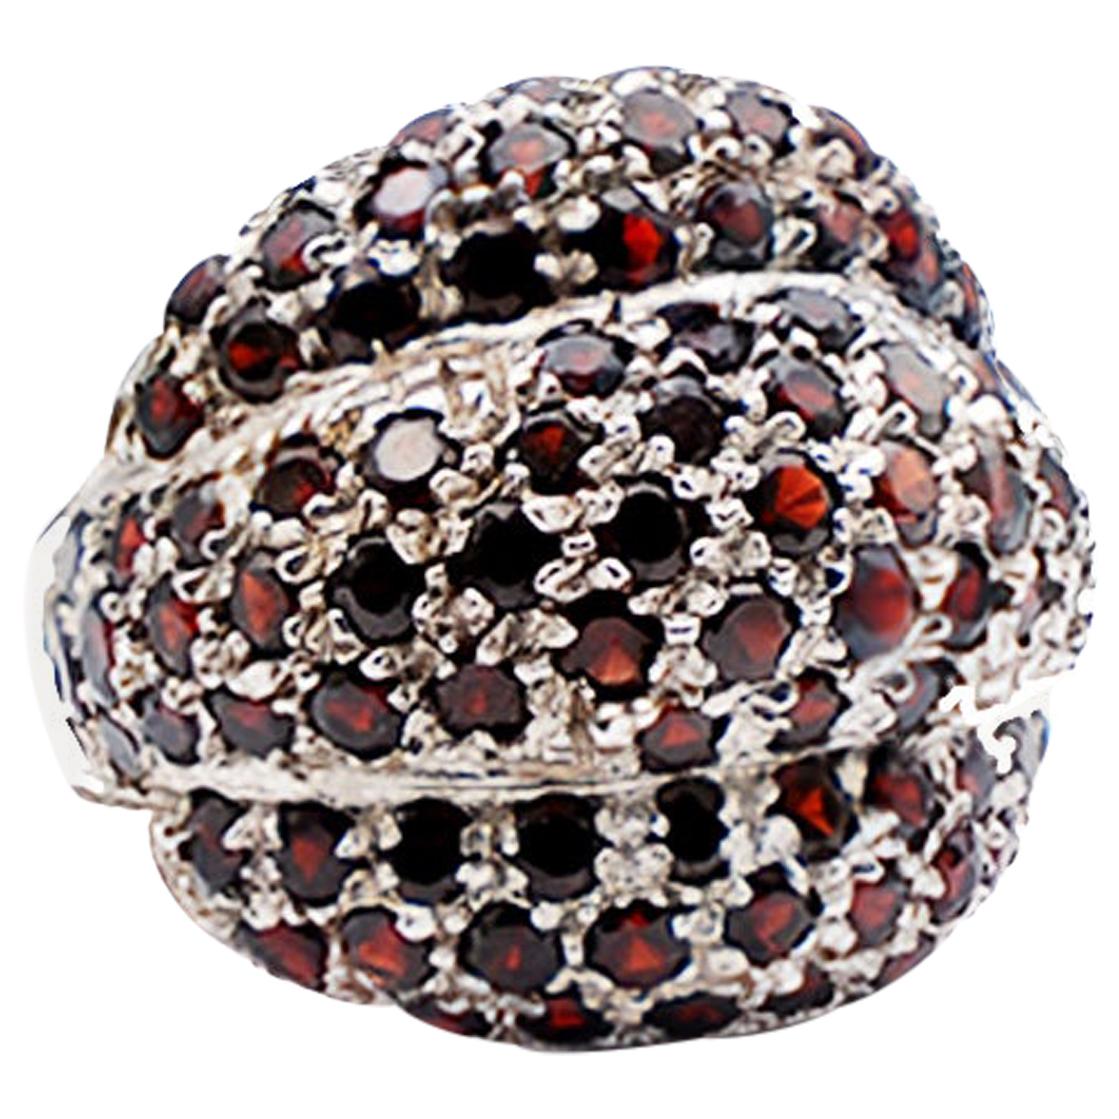 3 Dome Garnet Dome Ring Pave Sterling Silver